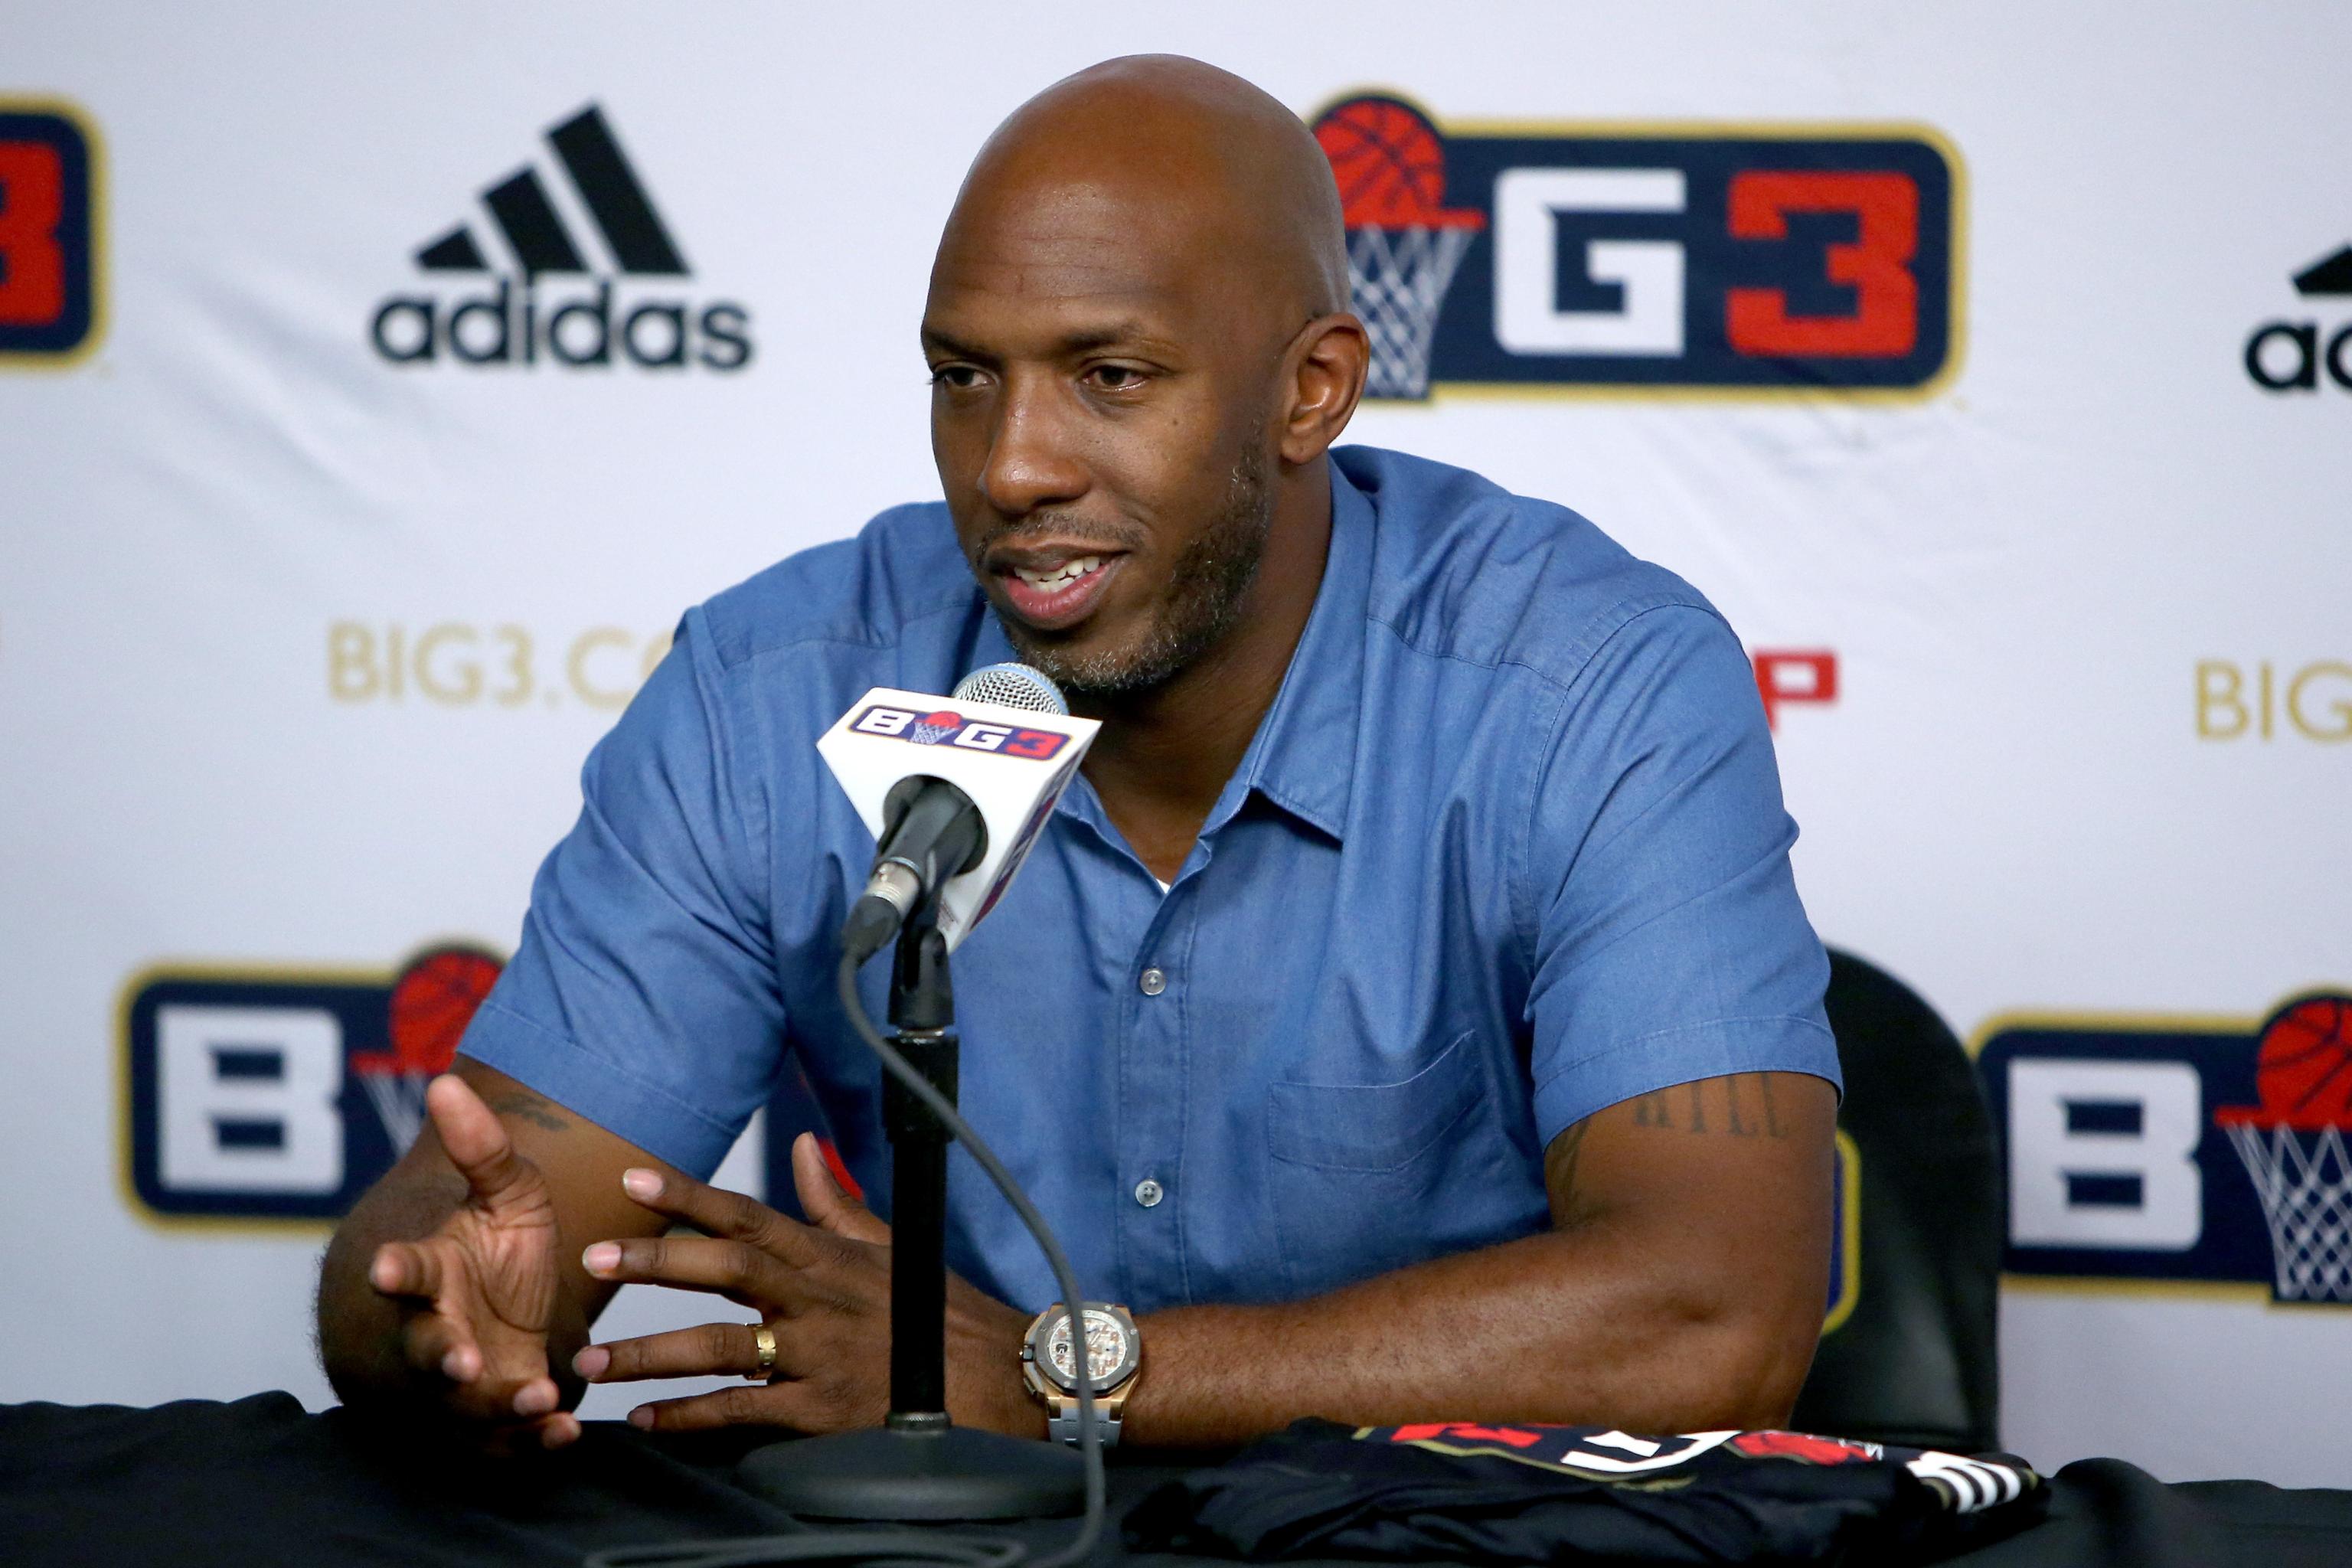 Chauncey Billups talks BIG3, today's NBA point guards, how to beat